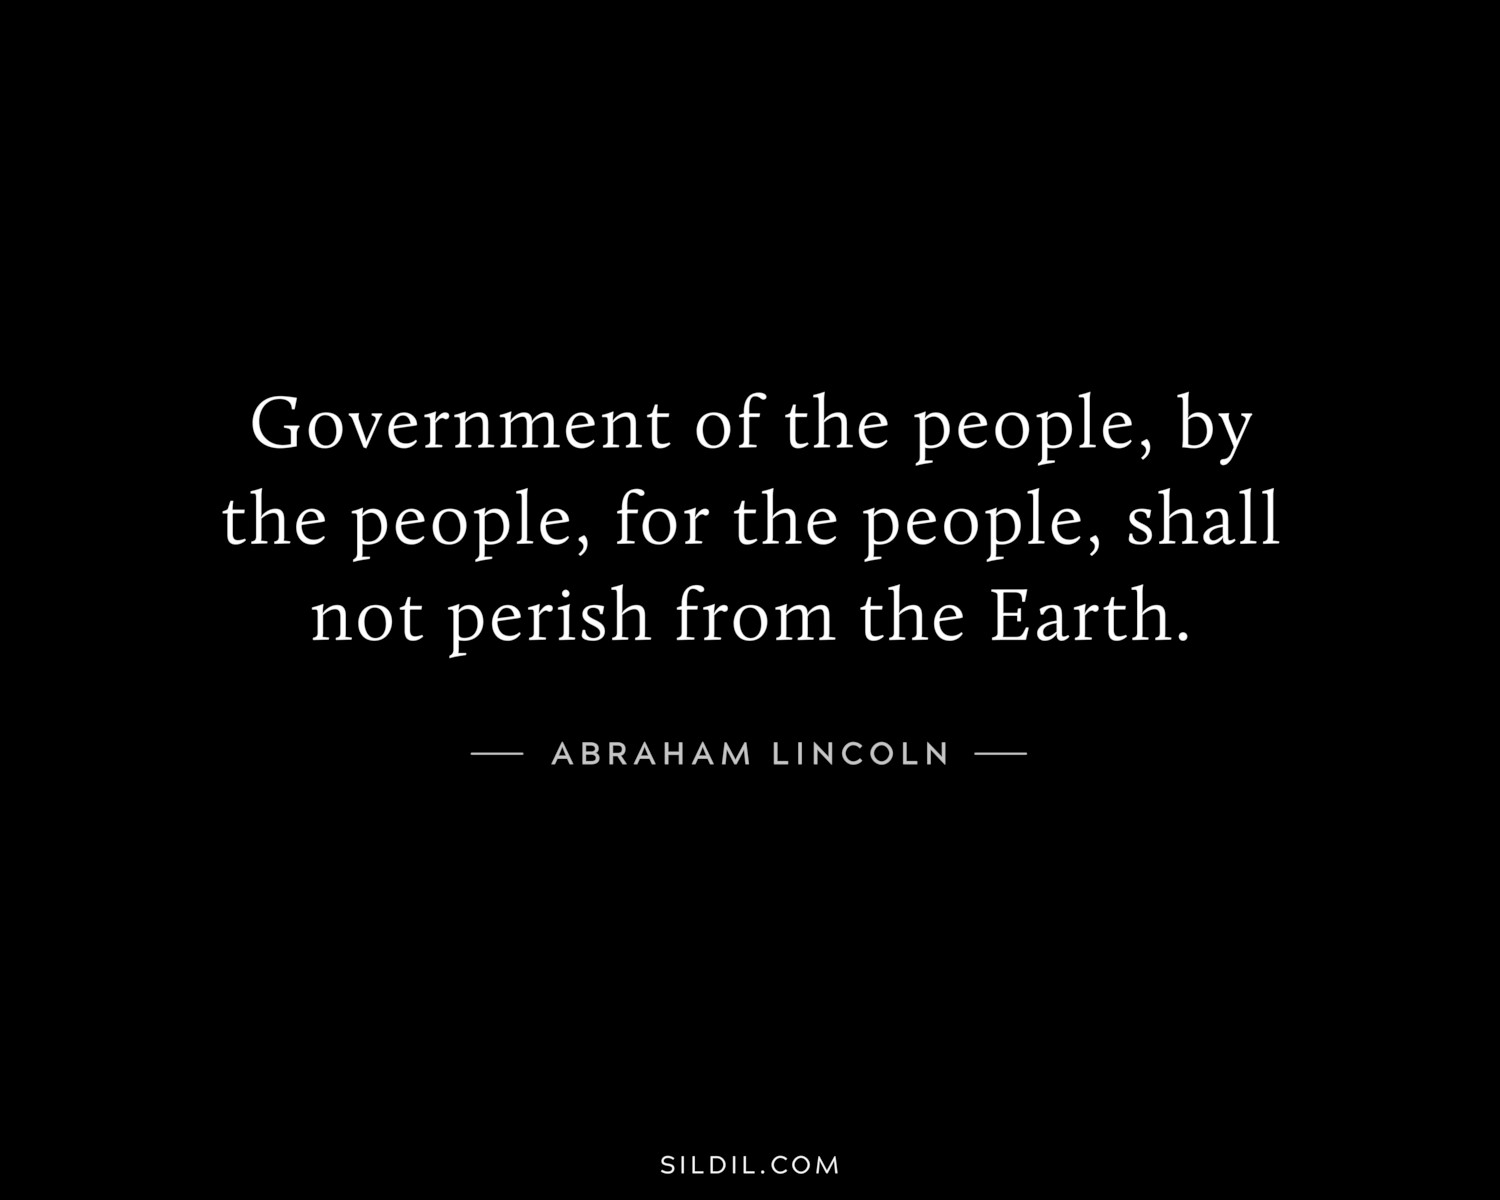 Government of the people, by the people, for the people, shall not perish from the Earth.